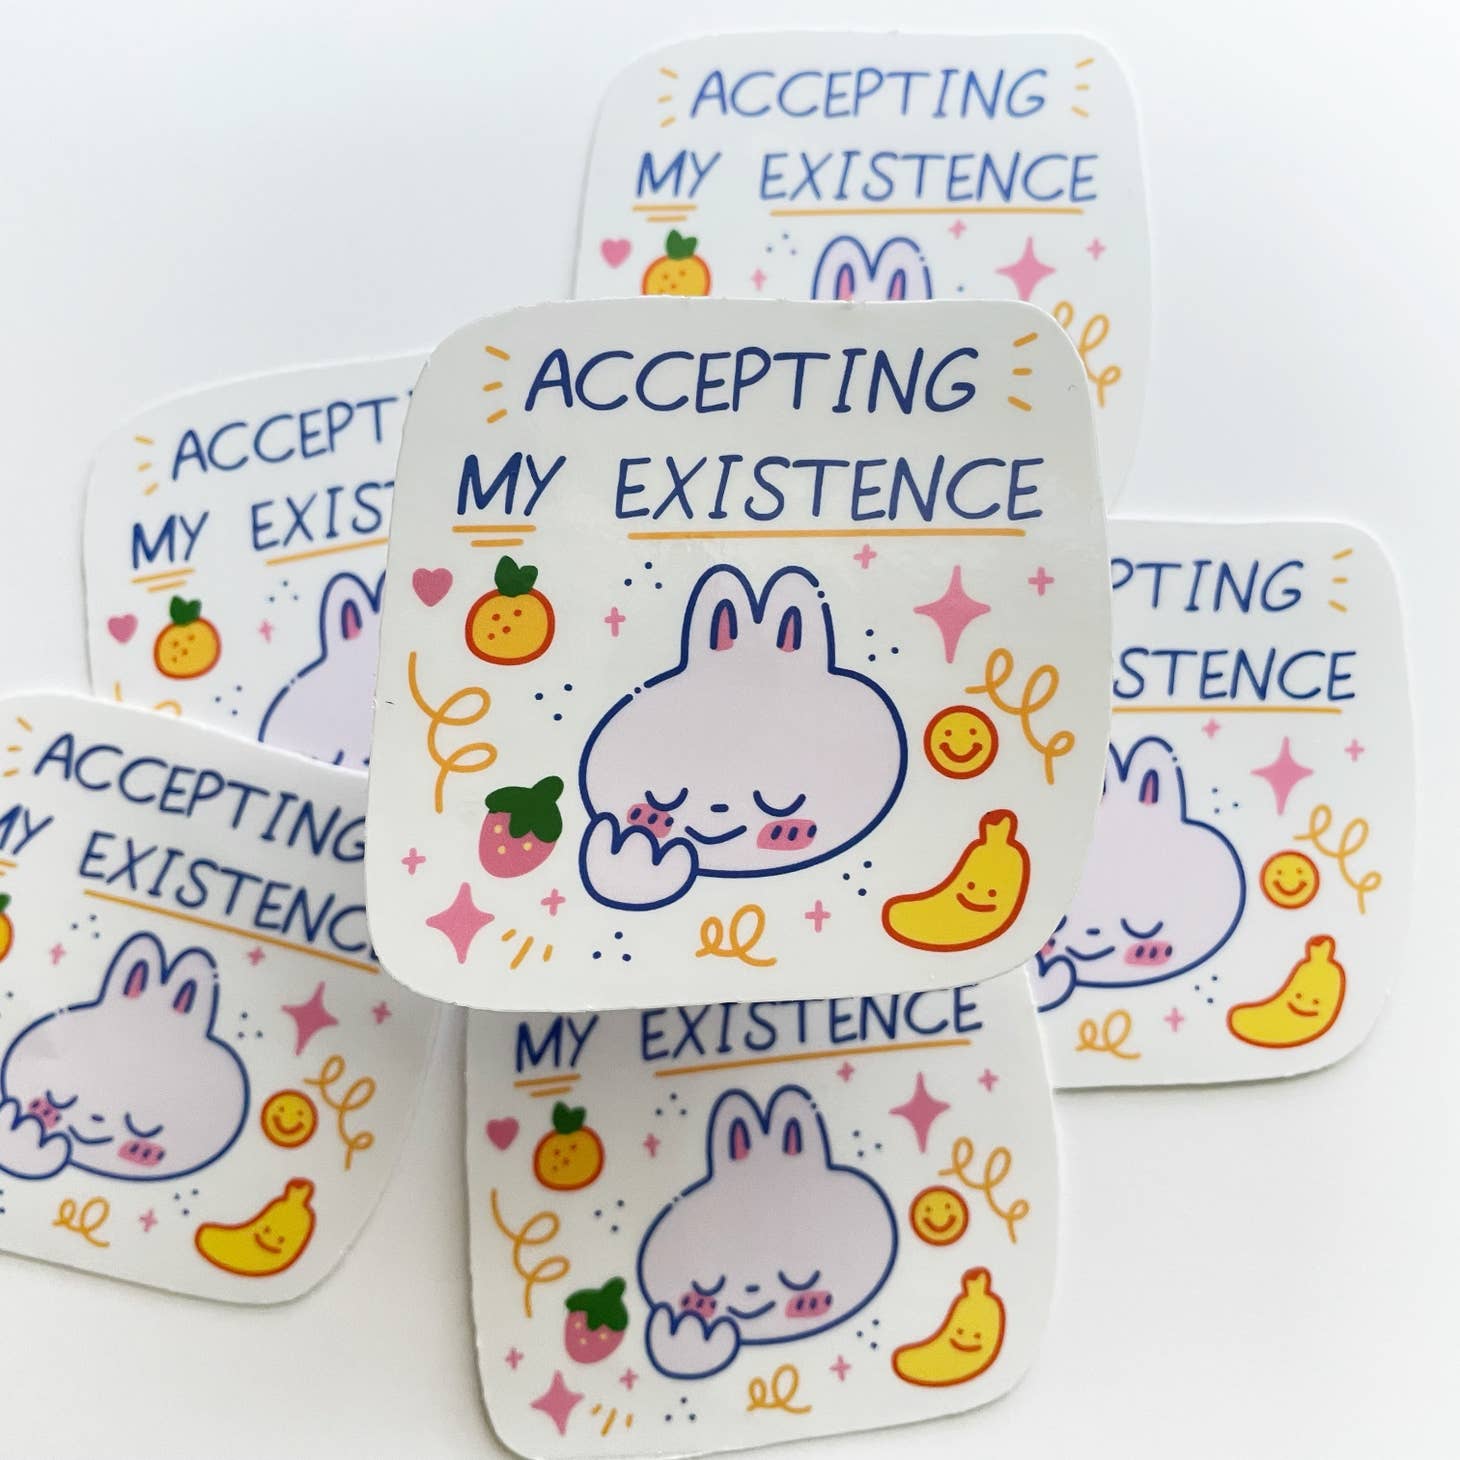 Sticker with white background and image of bunny with pink doodles and yellow banana and smiley date.  Blue text says, "Accepting my existence", 